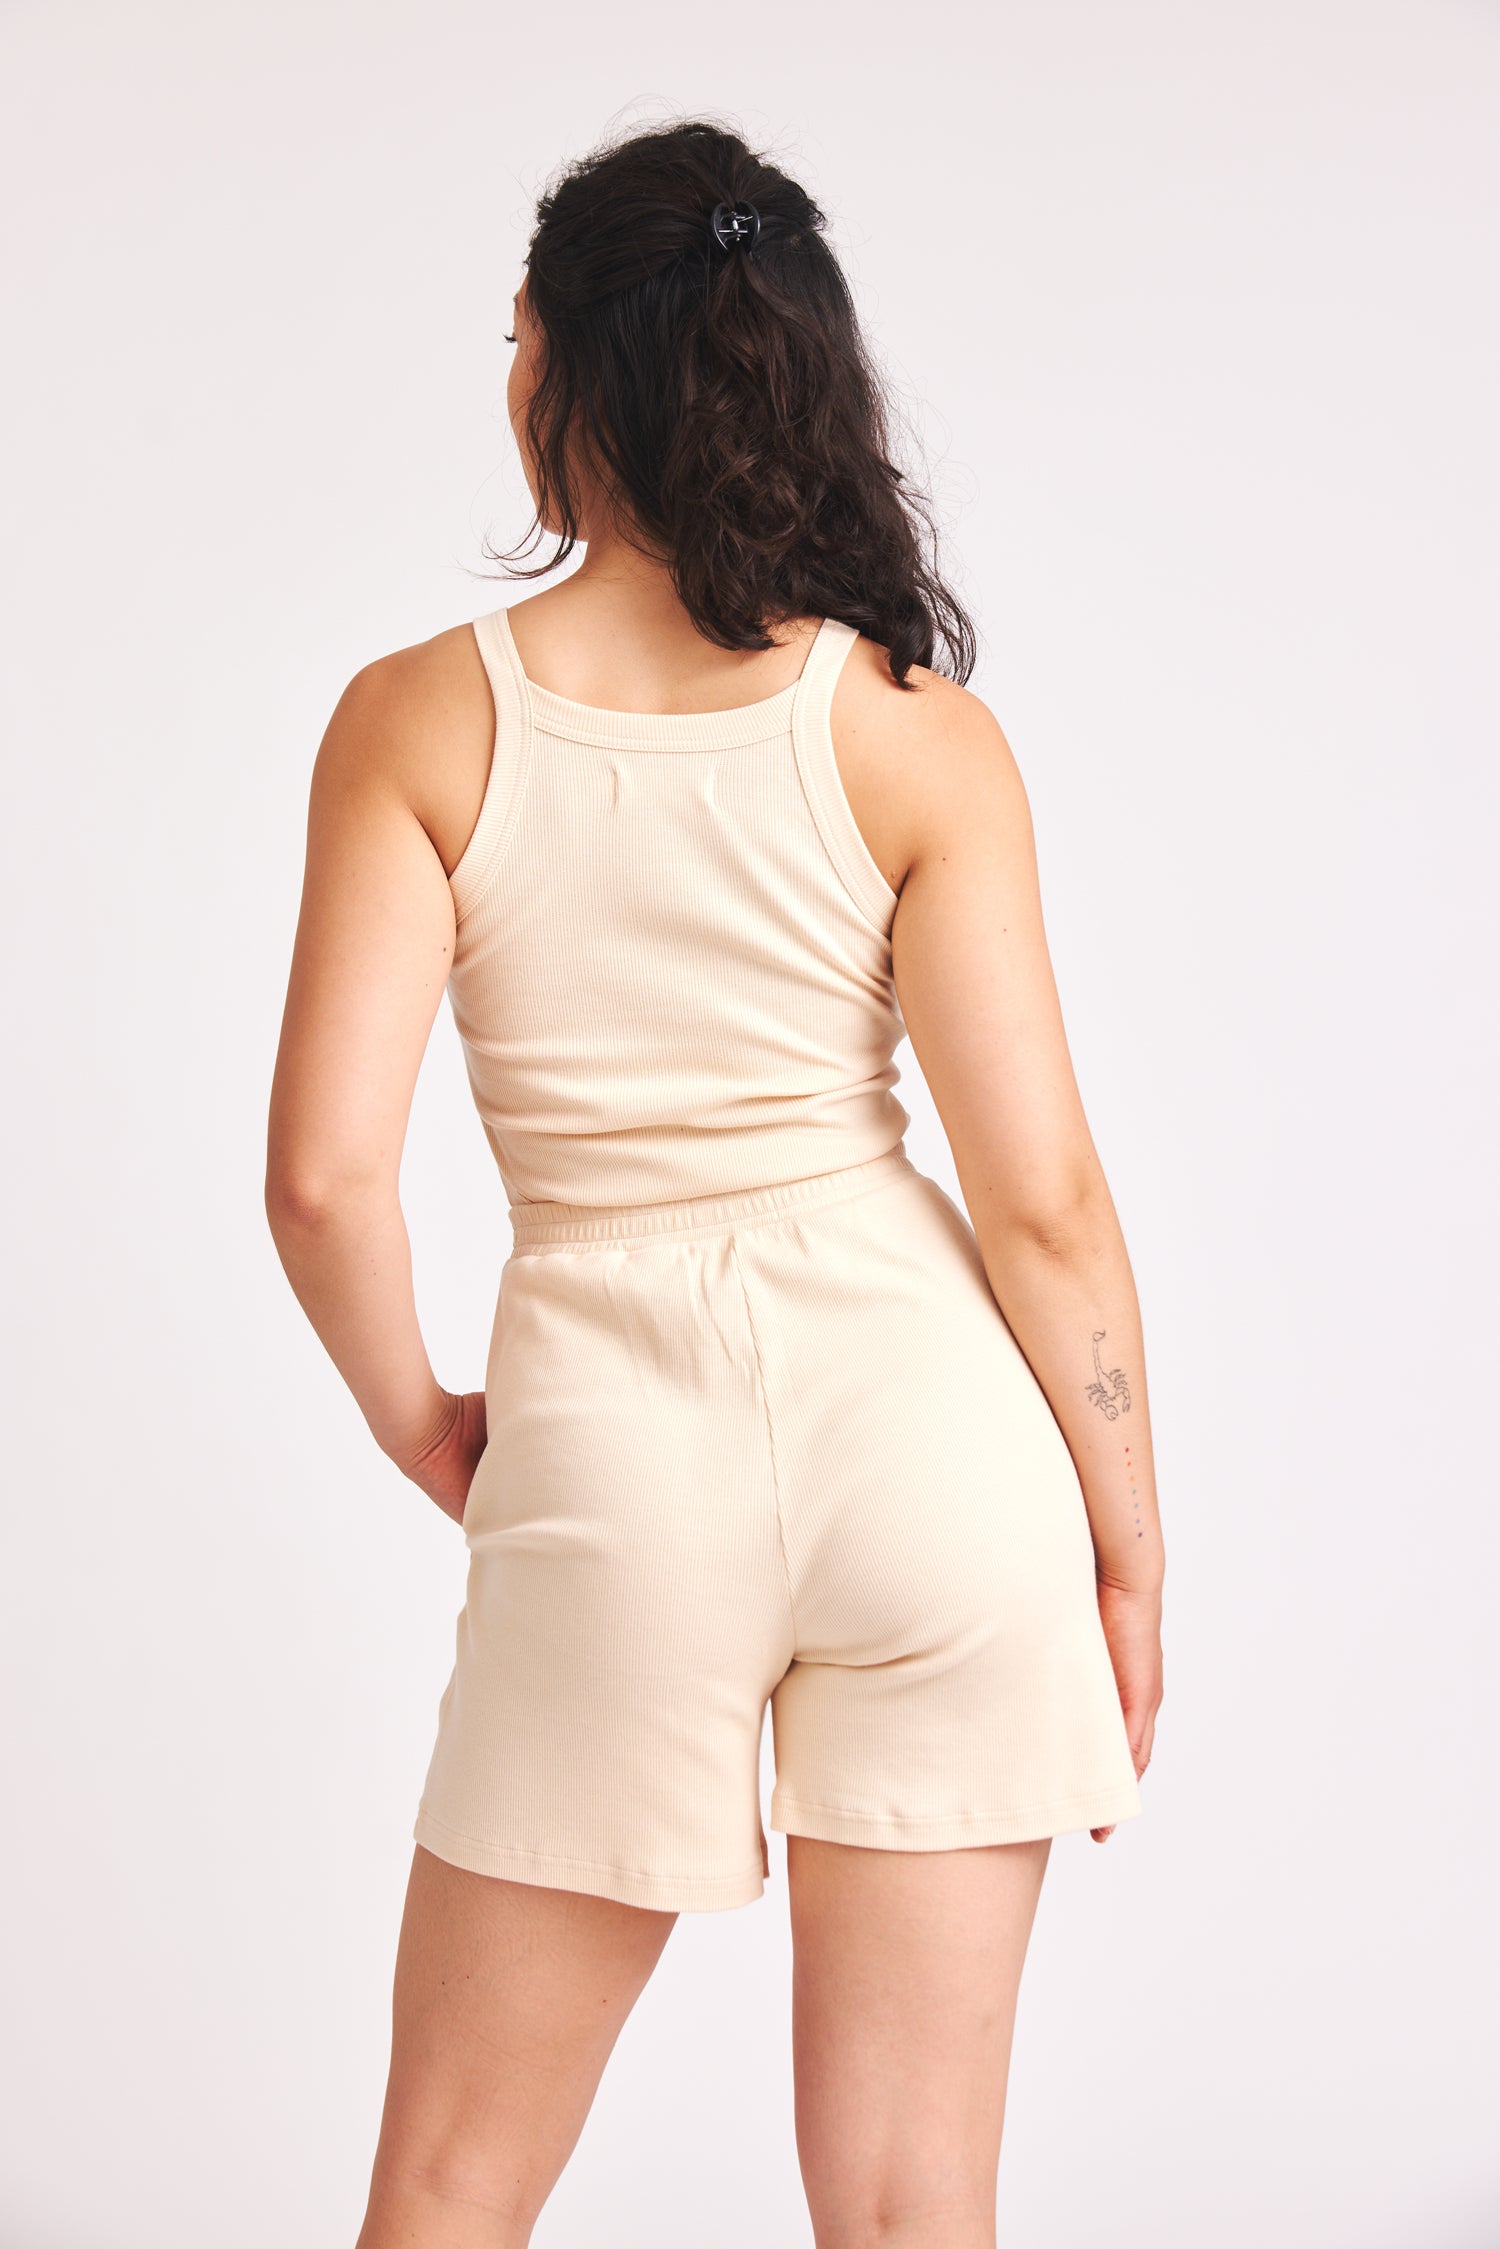 Natural-colored Betti shorts made of organic cotton from Baige the Label